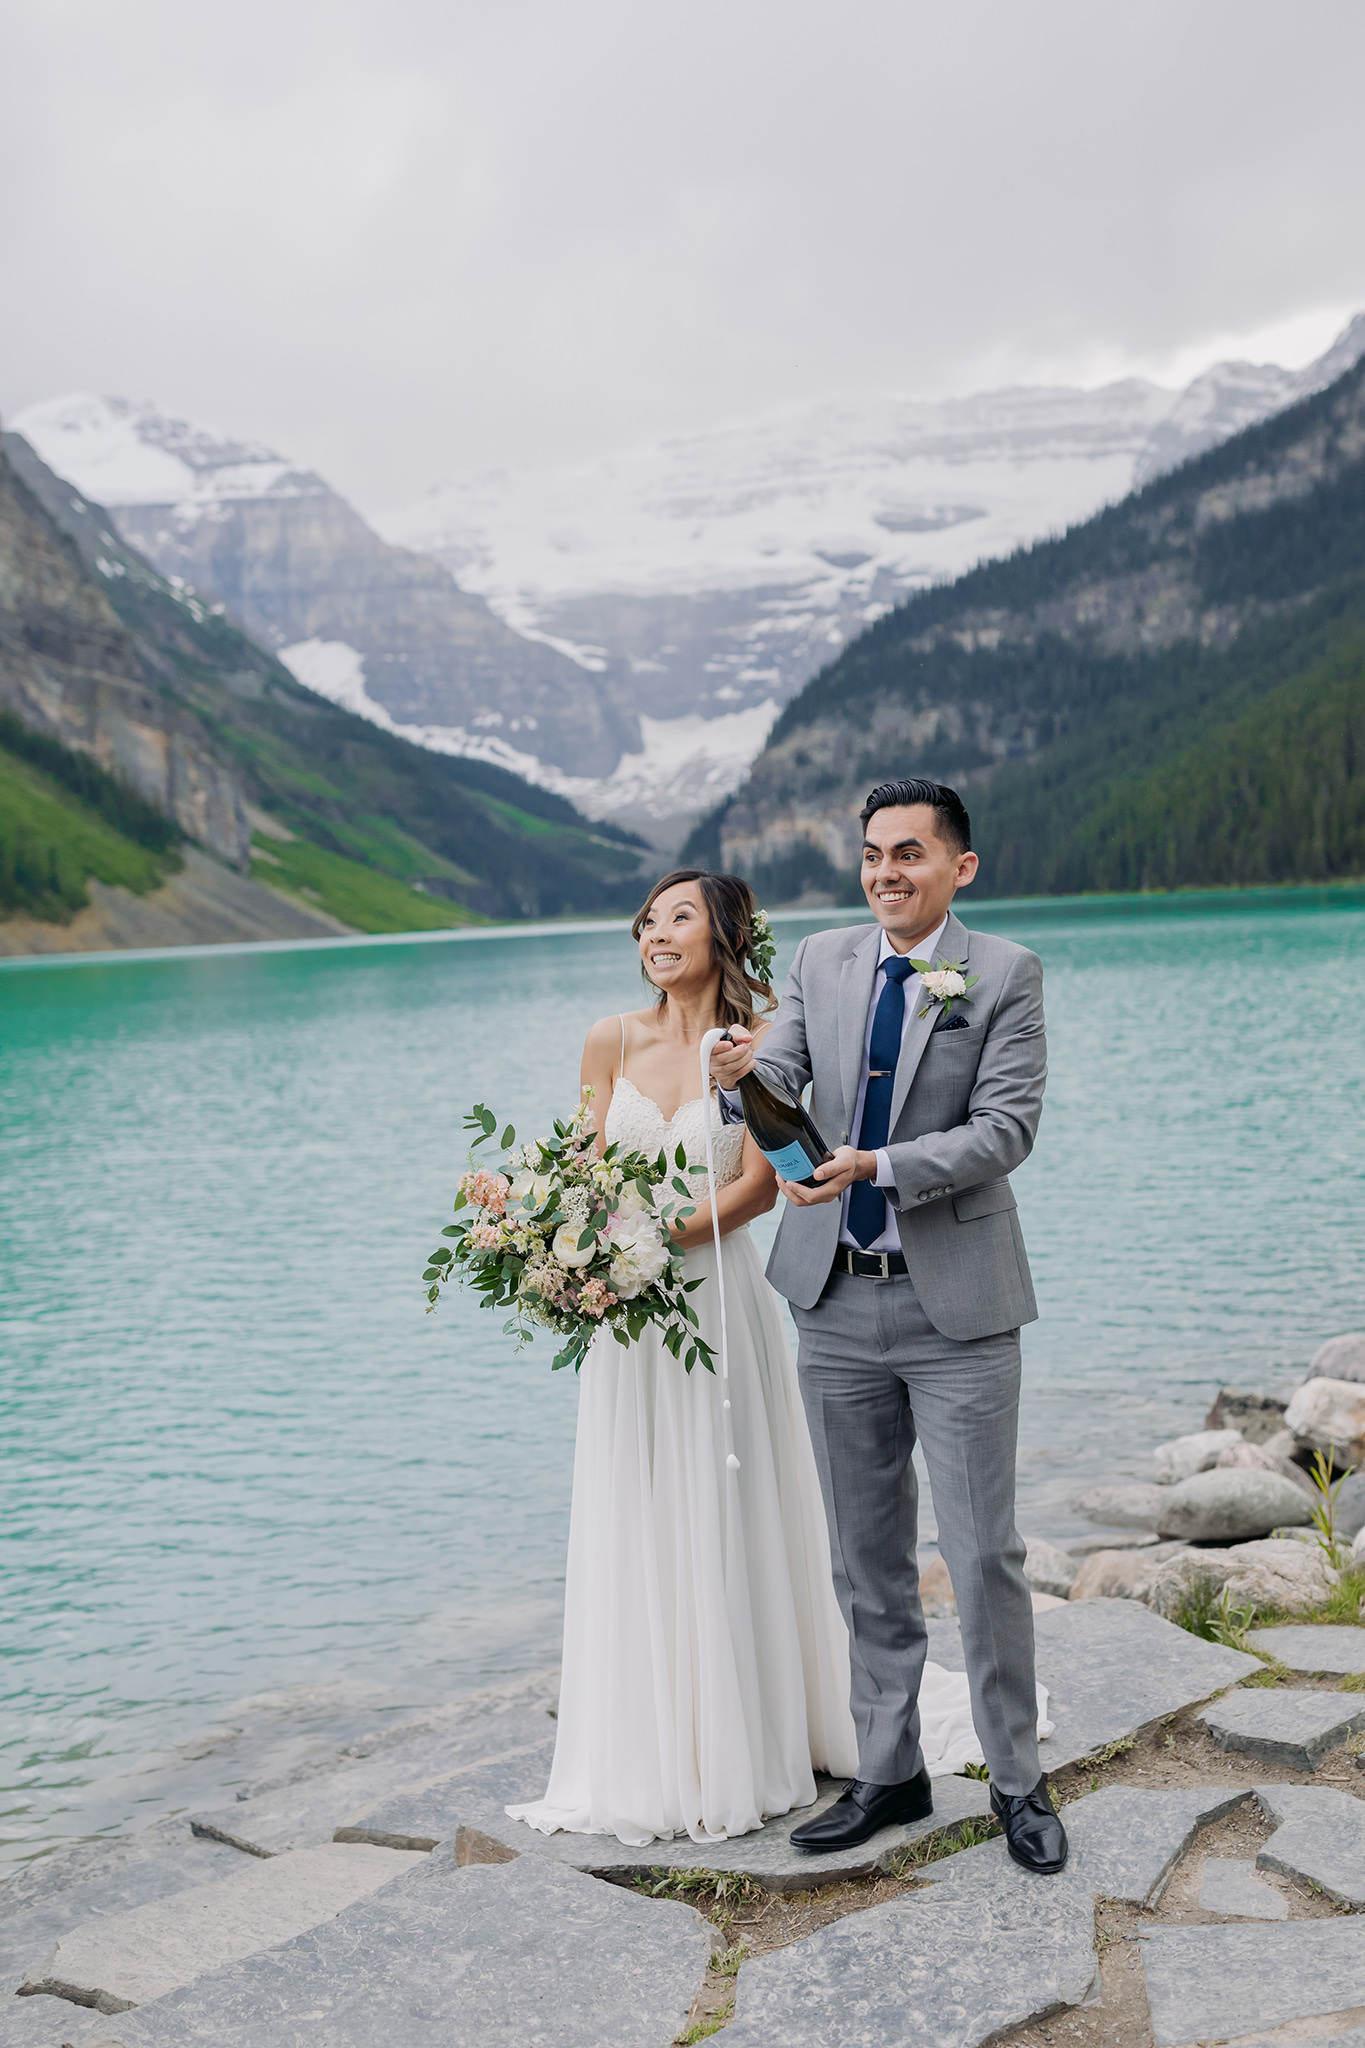 Lake Louise lakeshore wedding champagne toast photographed by elopement photographer ENV Photography